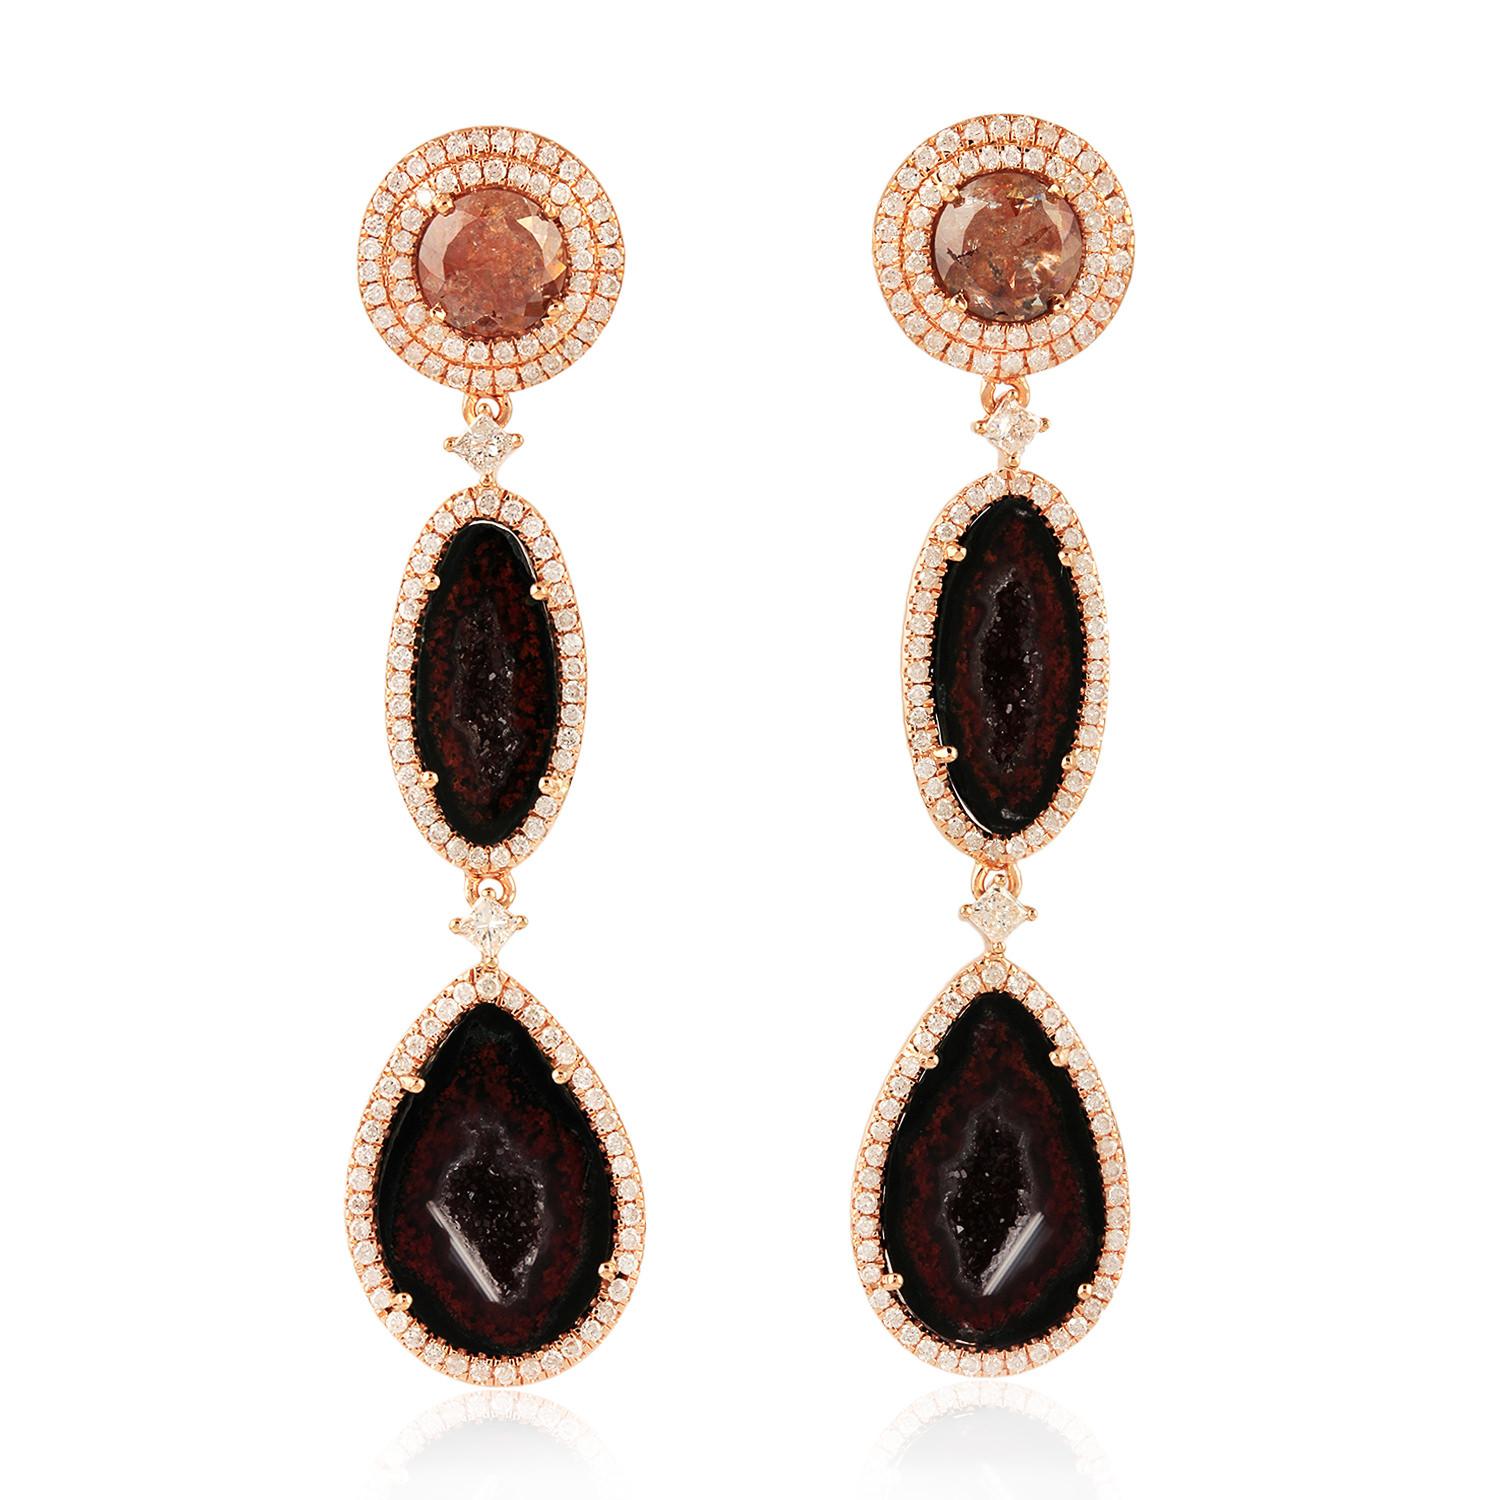 Pretty and perfect brown geode earring with ice diamond studs with pave diamond around is one graceful piece for any occasion.

Closure: Push Post

18k: 11.57gms
Diamond: 2.96Cts
Geode: 13.6Cts
